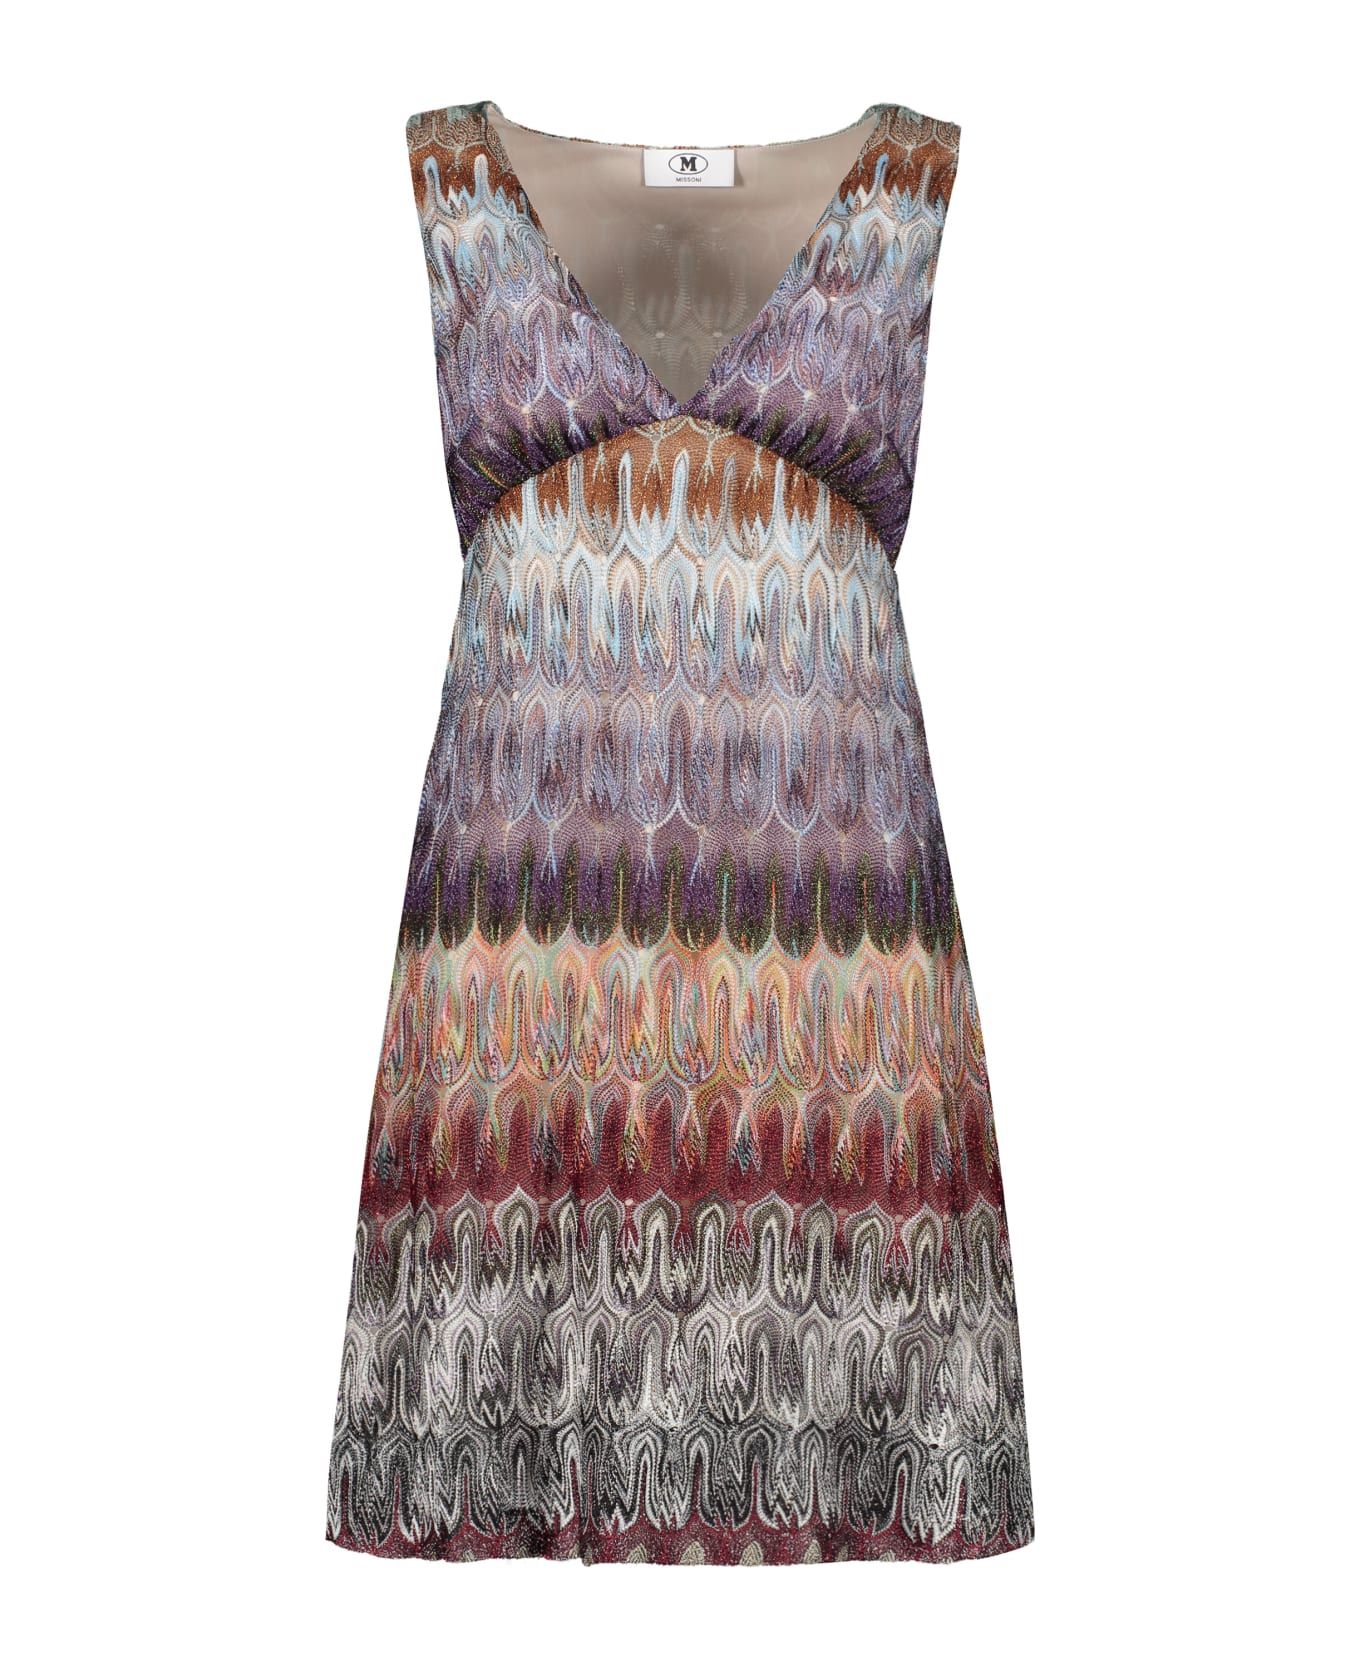 M Missoni Abstract Motif Knitted Dress - Multicolor